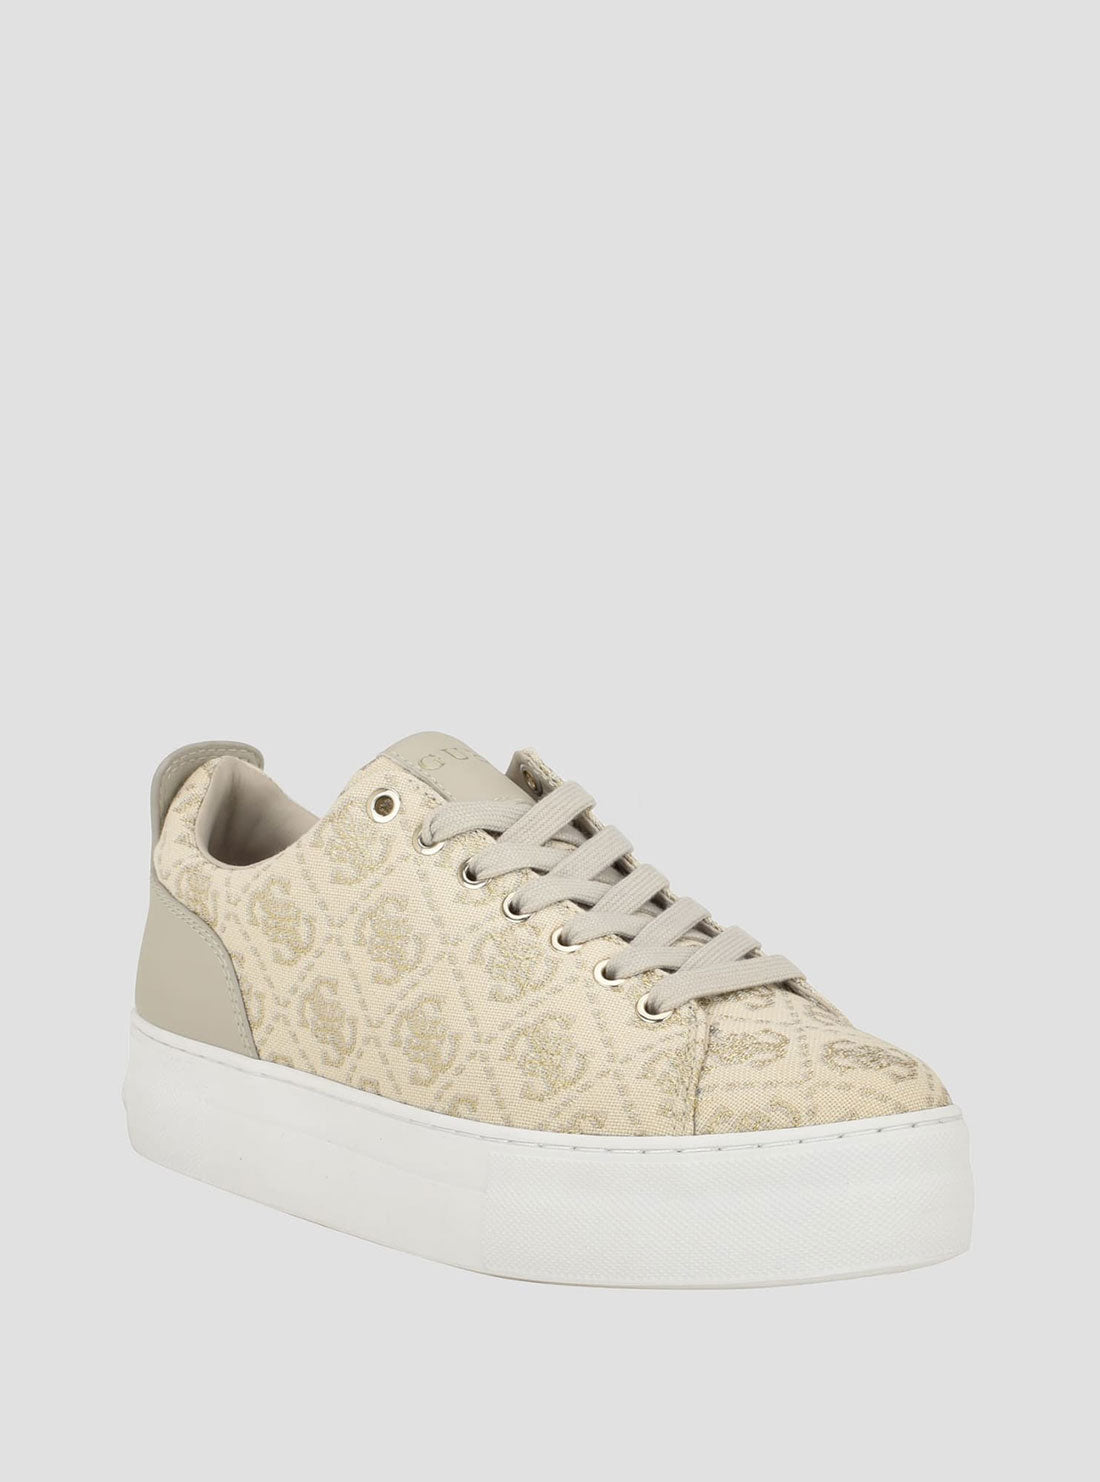 GUESS Gold Logo Giaa Low-Top Sneakers front view